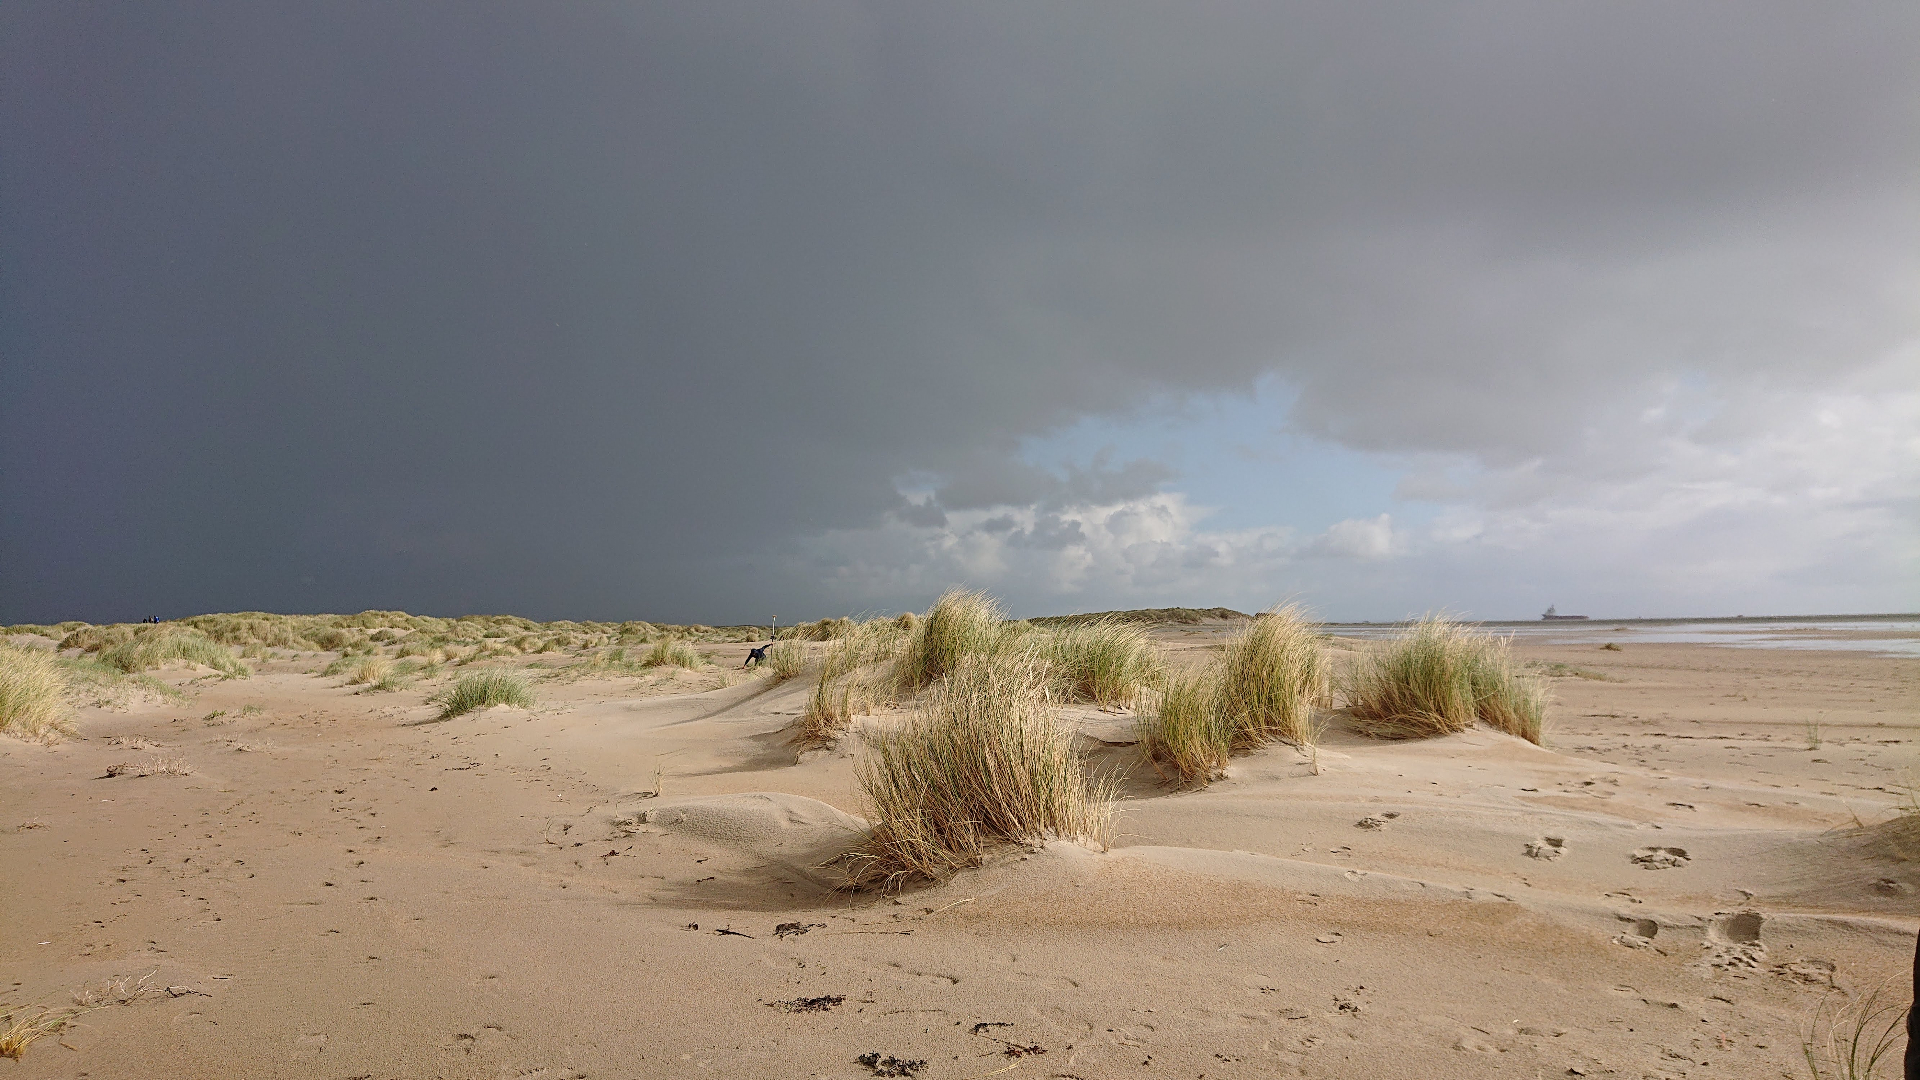 Taking measures while waiting for the rain in the embryonic dunes of the Hors, Texel. Photo Carlijn Lammers 